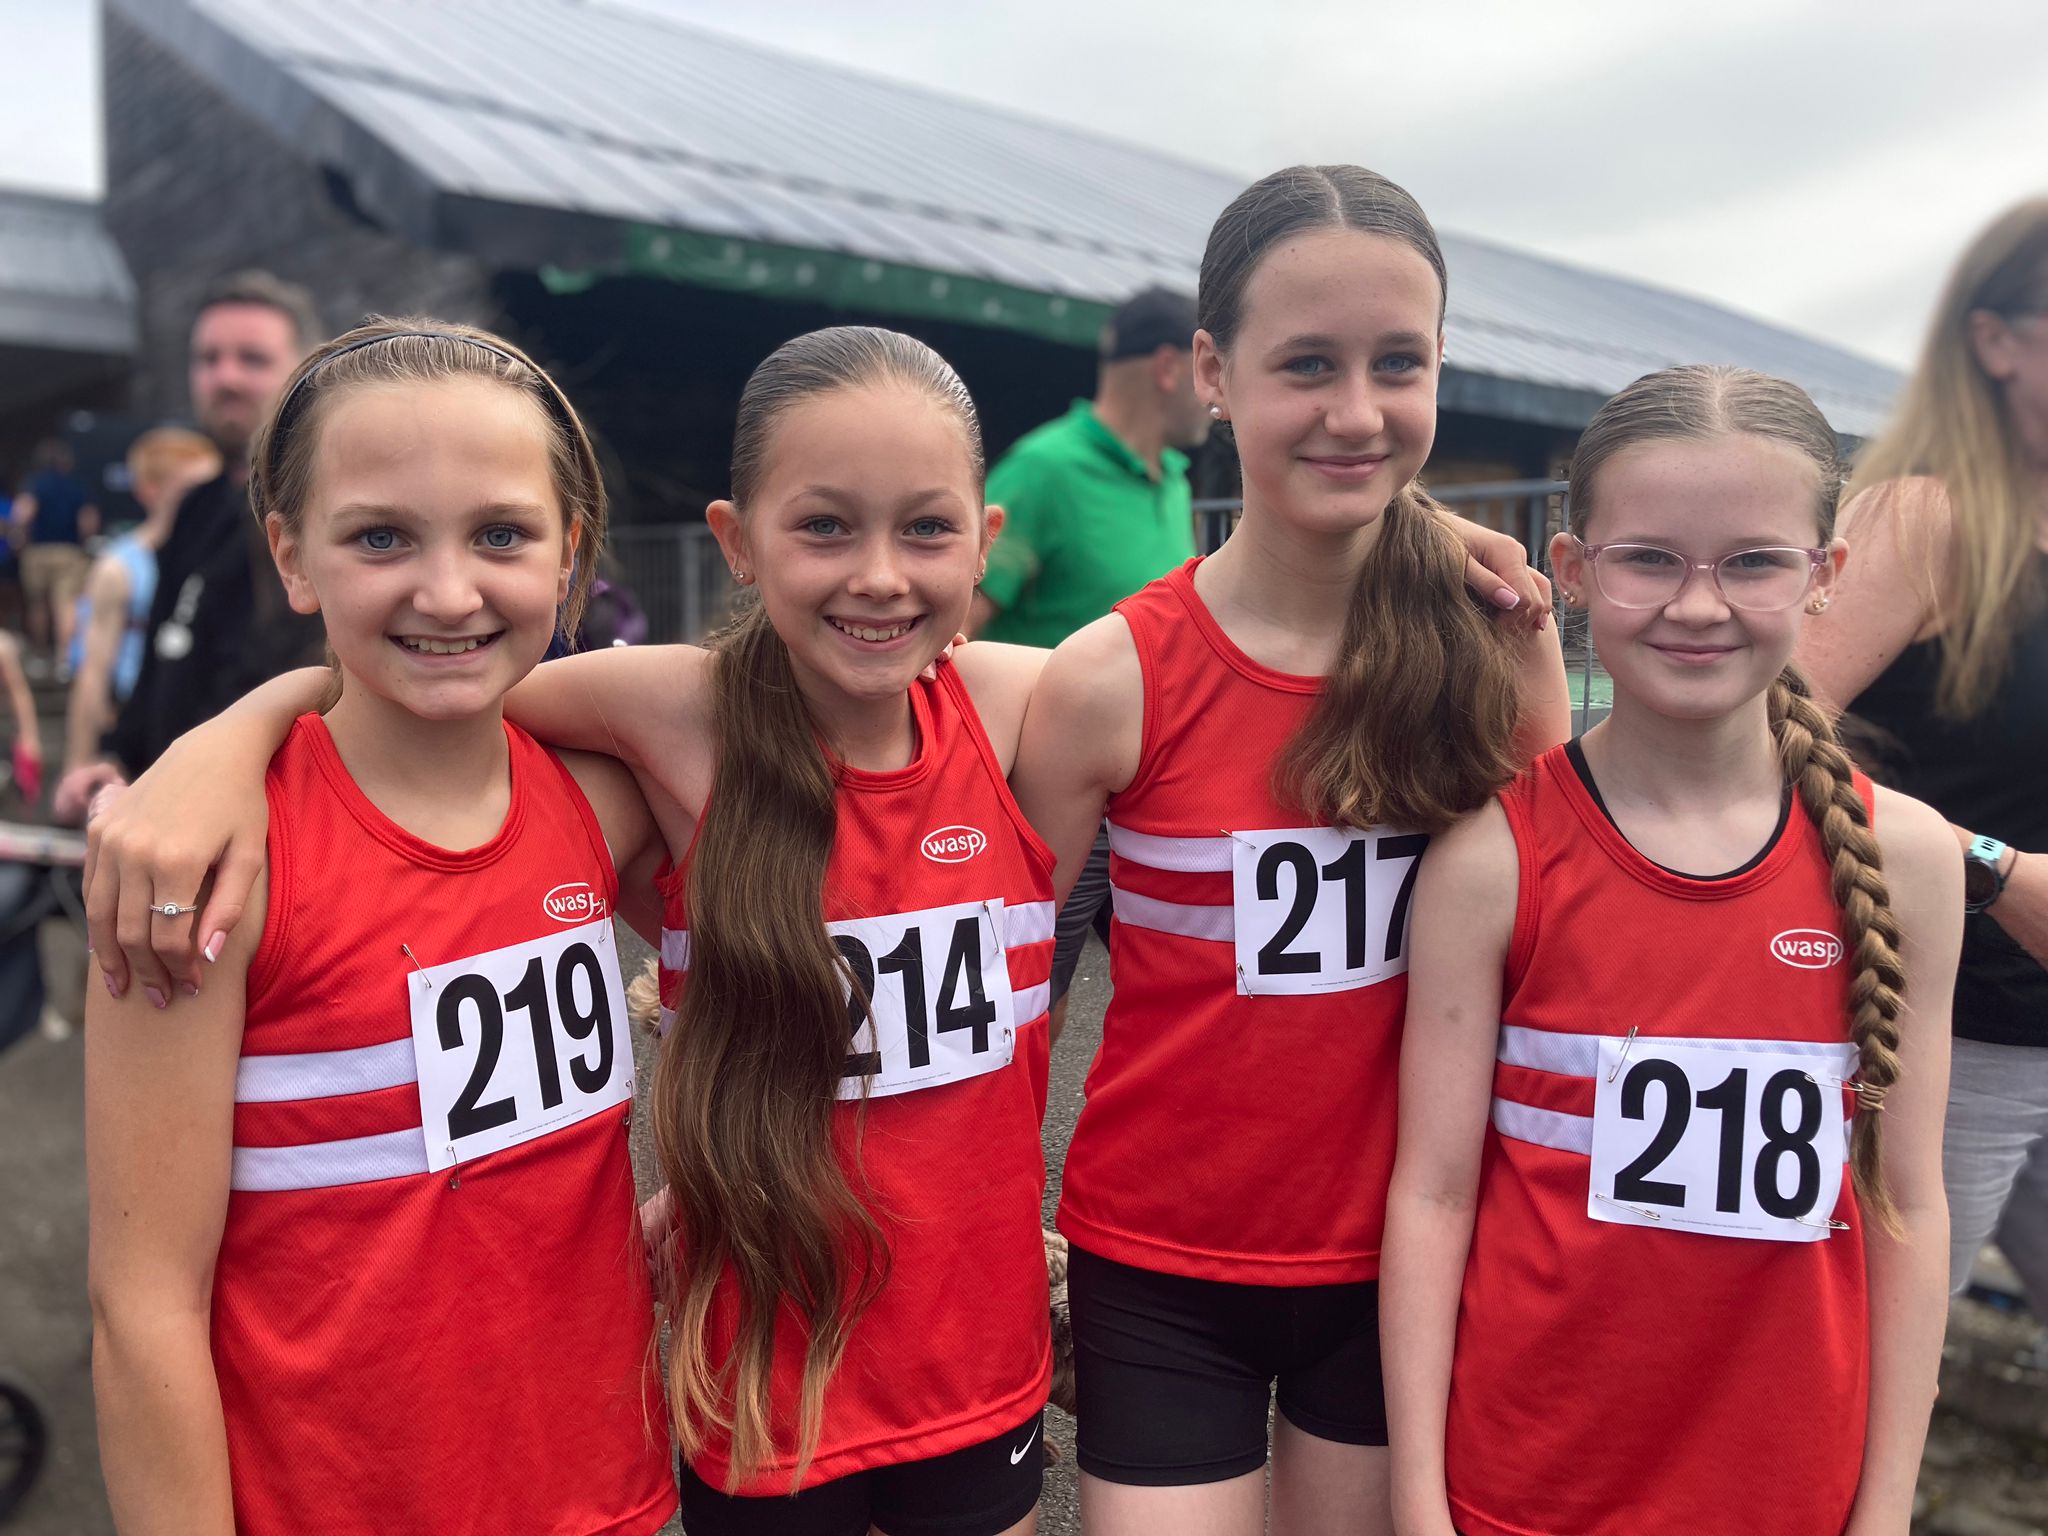 Sophie Brennan, Katie Moore, Lily Cuthbertson and Lucy Thomson at the LAAA Track & Field Championships